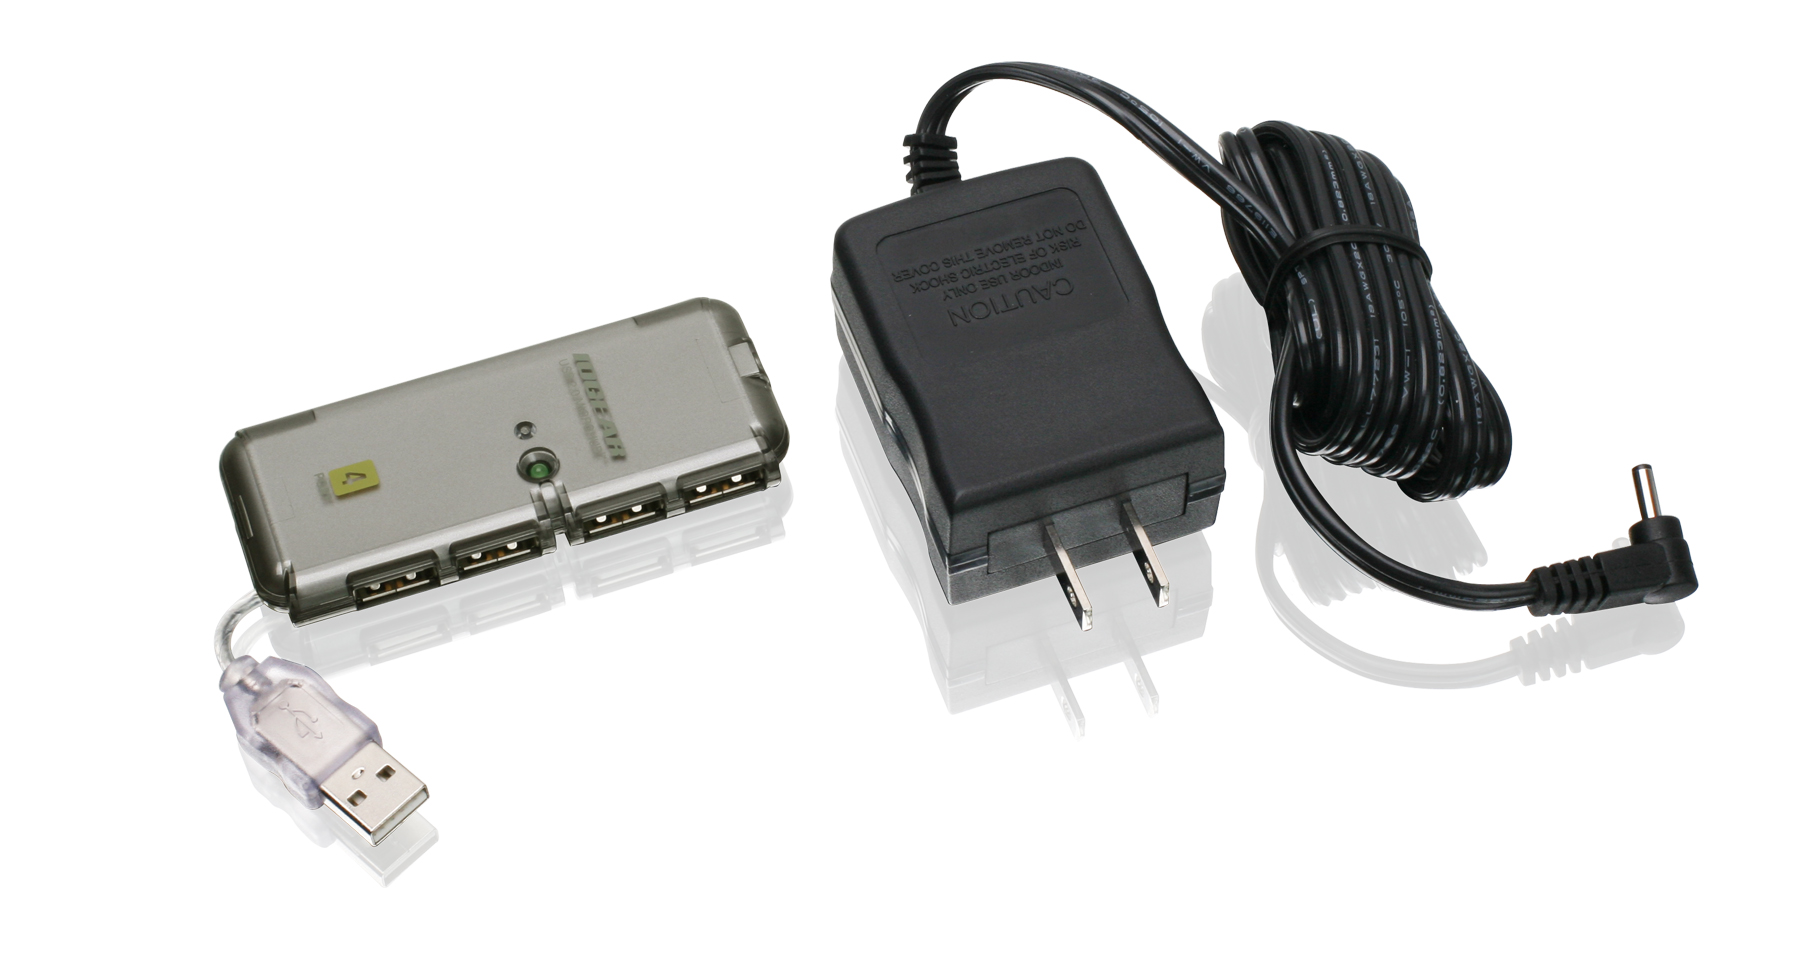 Industrial 4 Port USB 2.0 Powered Hub with Power Adapter for PC